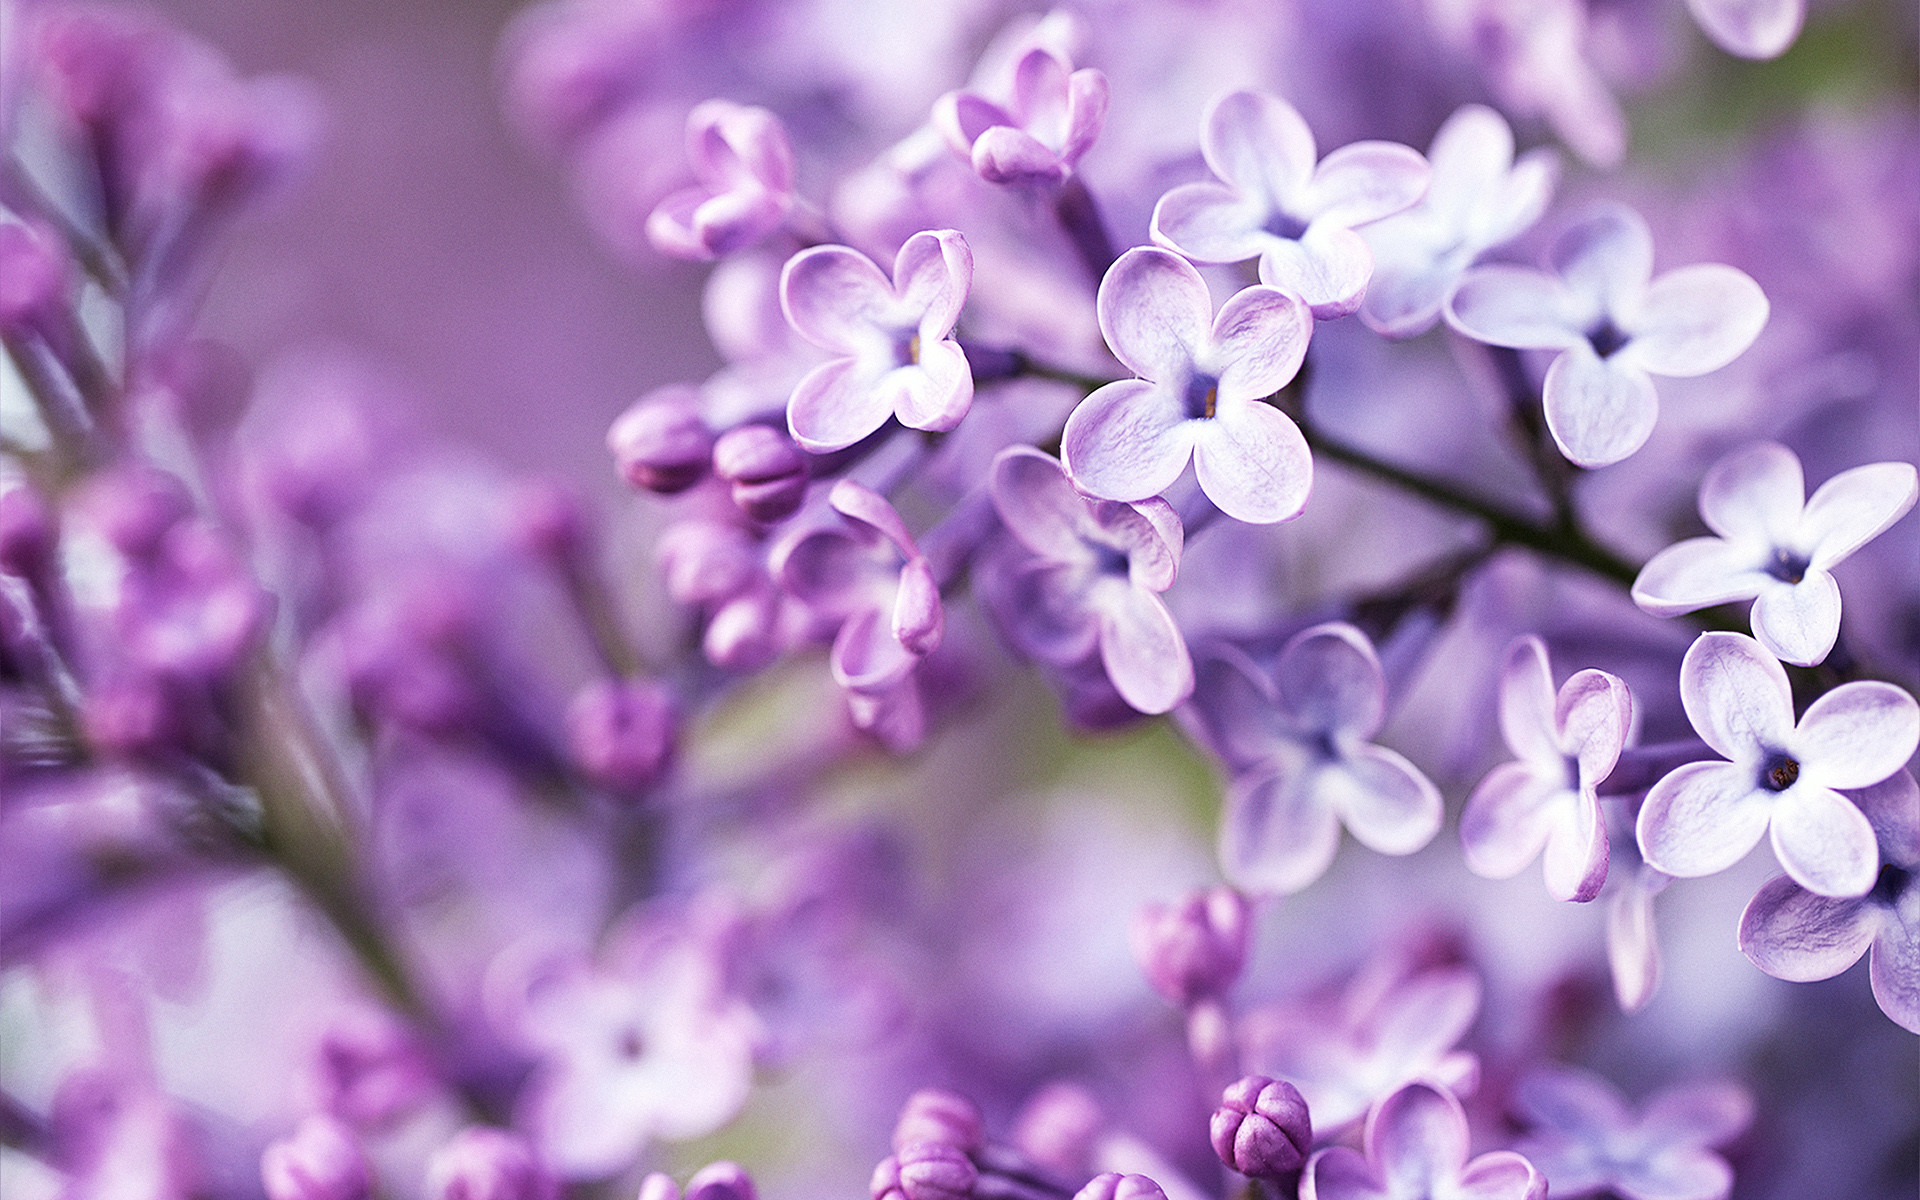 Light Purple Flowers H5 Background Wallpaper Image For Free Download   Pngtree